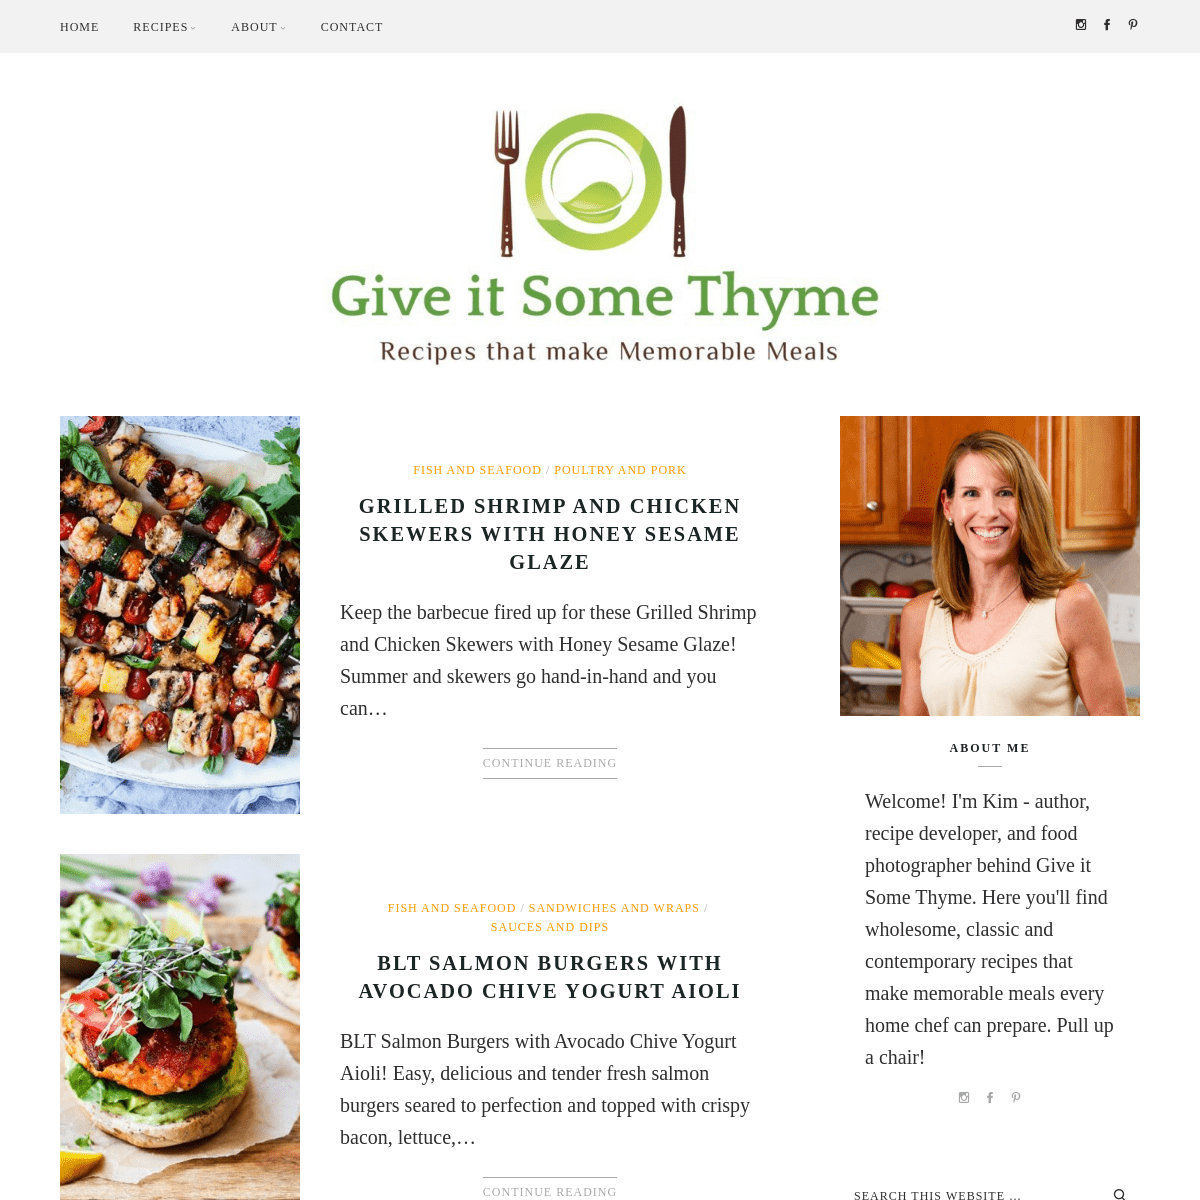 A complete backup of https://giveitsomethyme.com